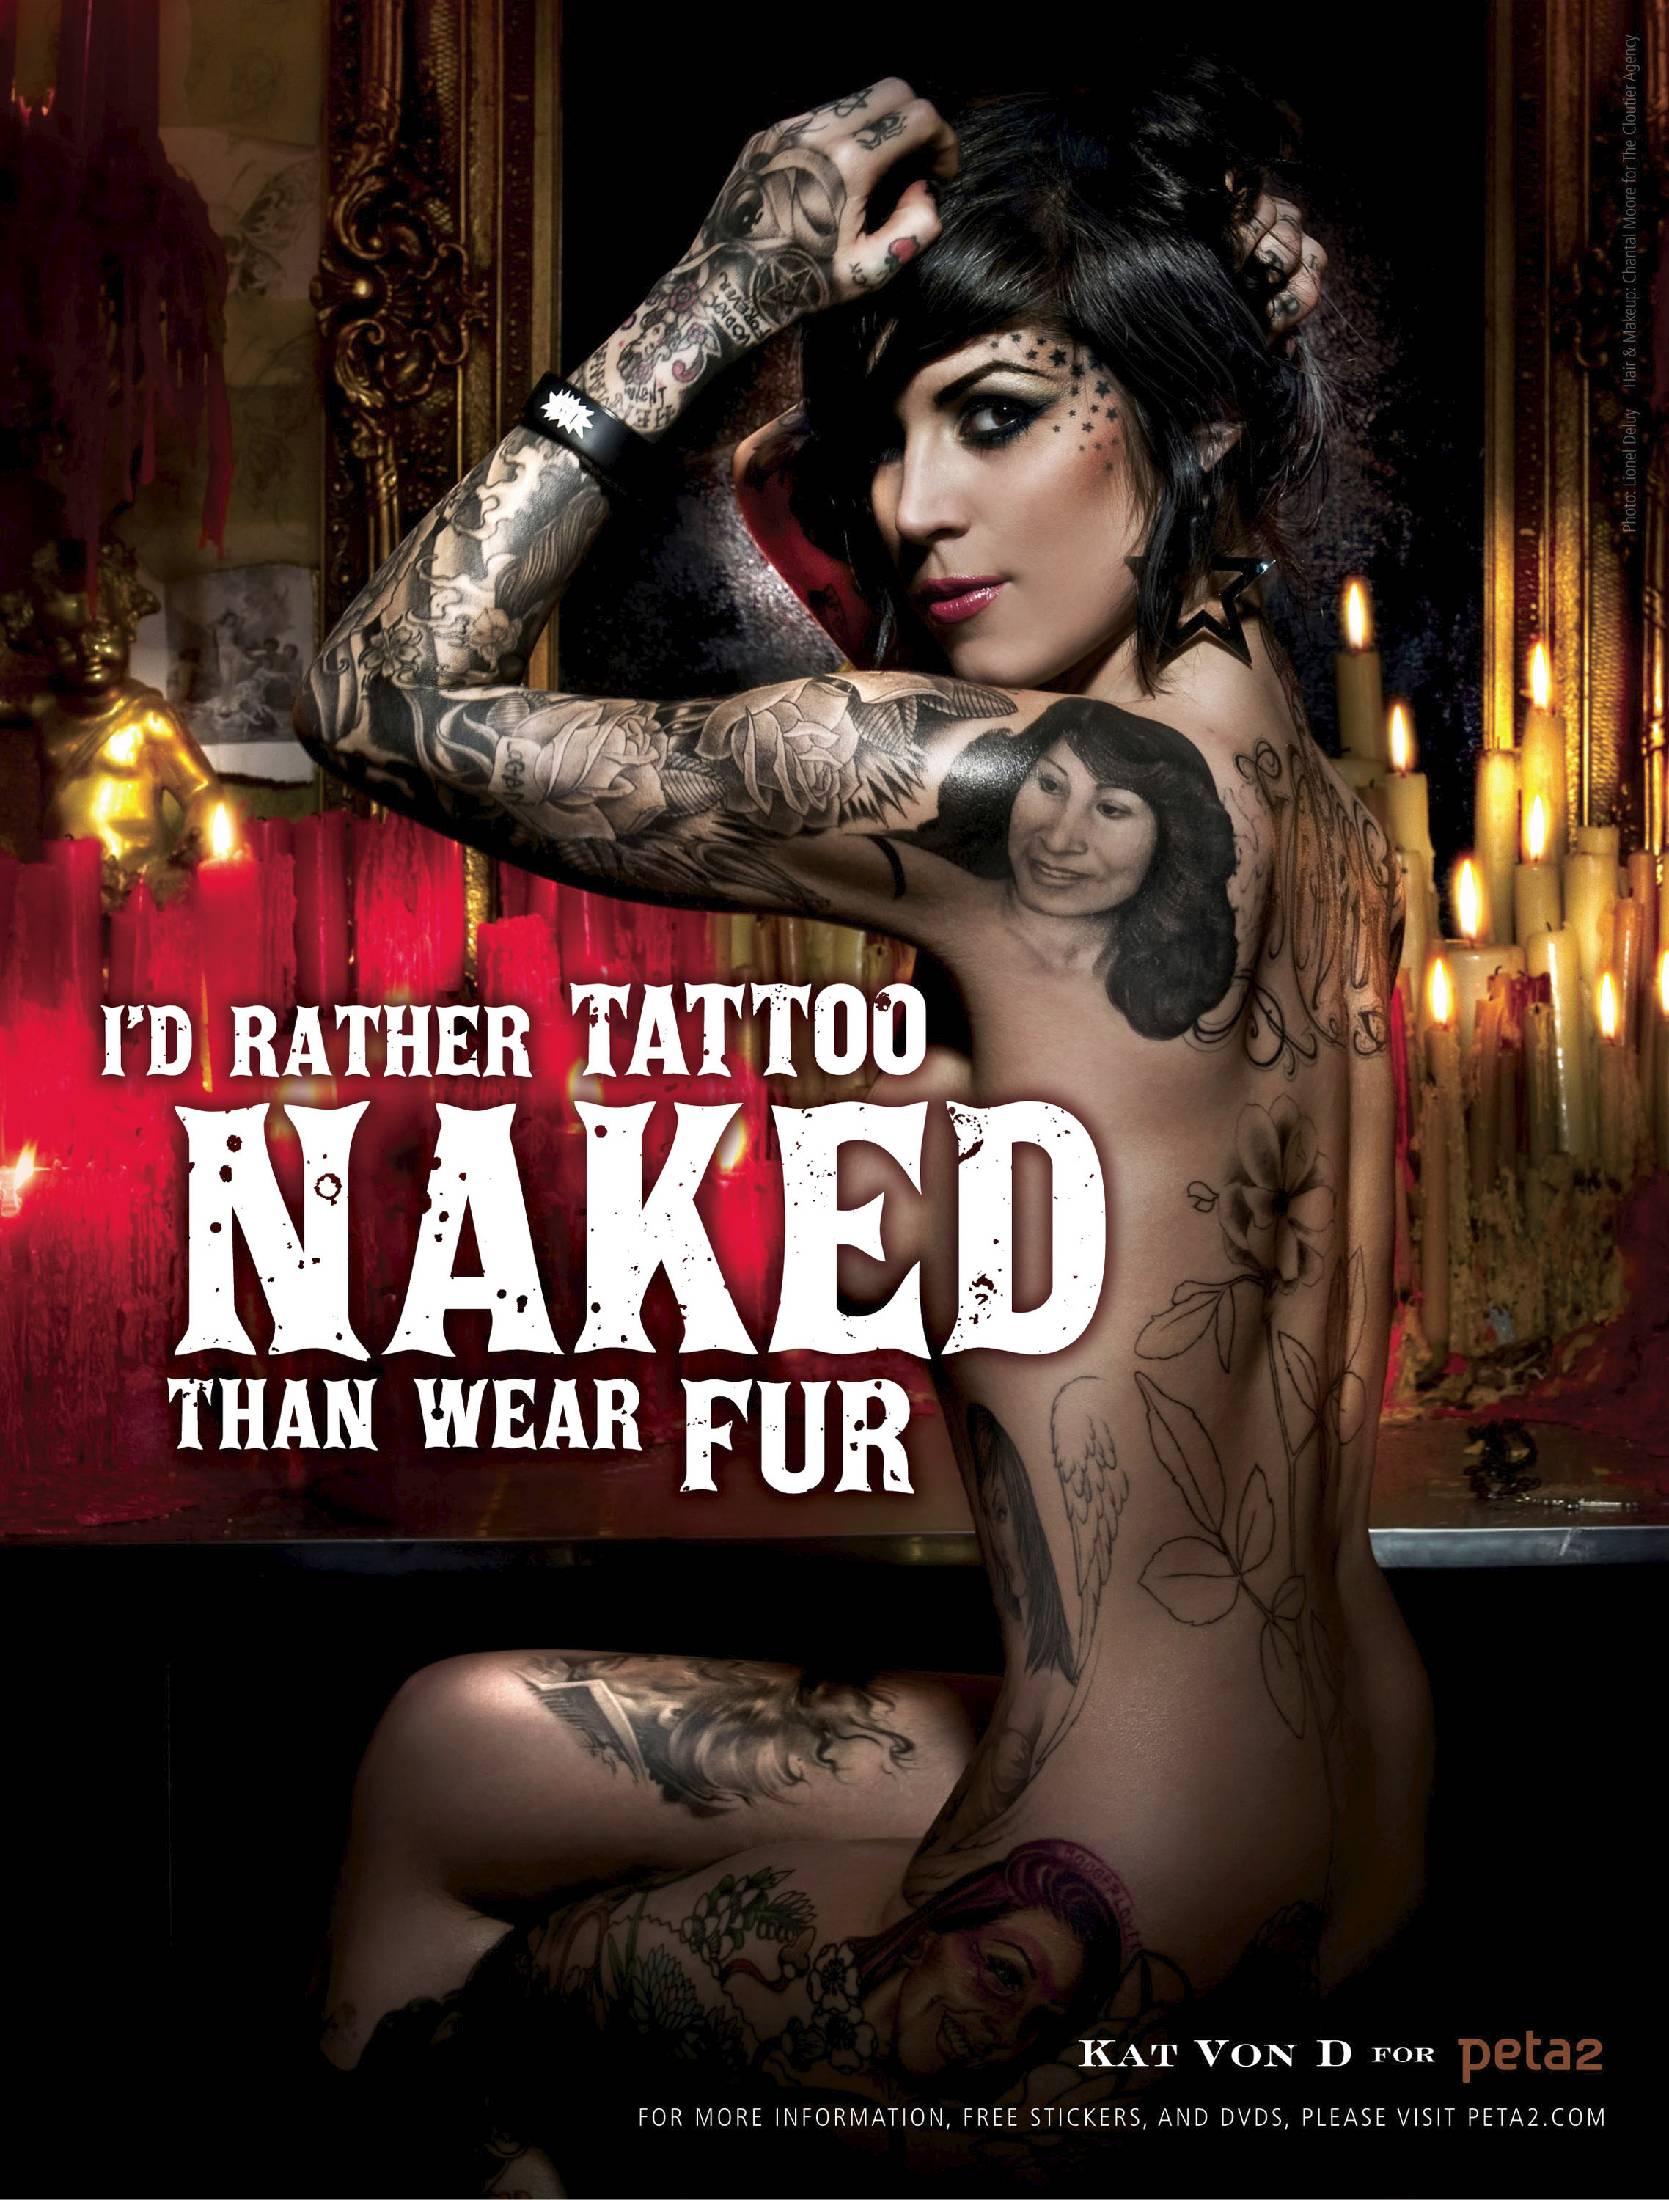 Naked pictures of kat von d